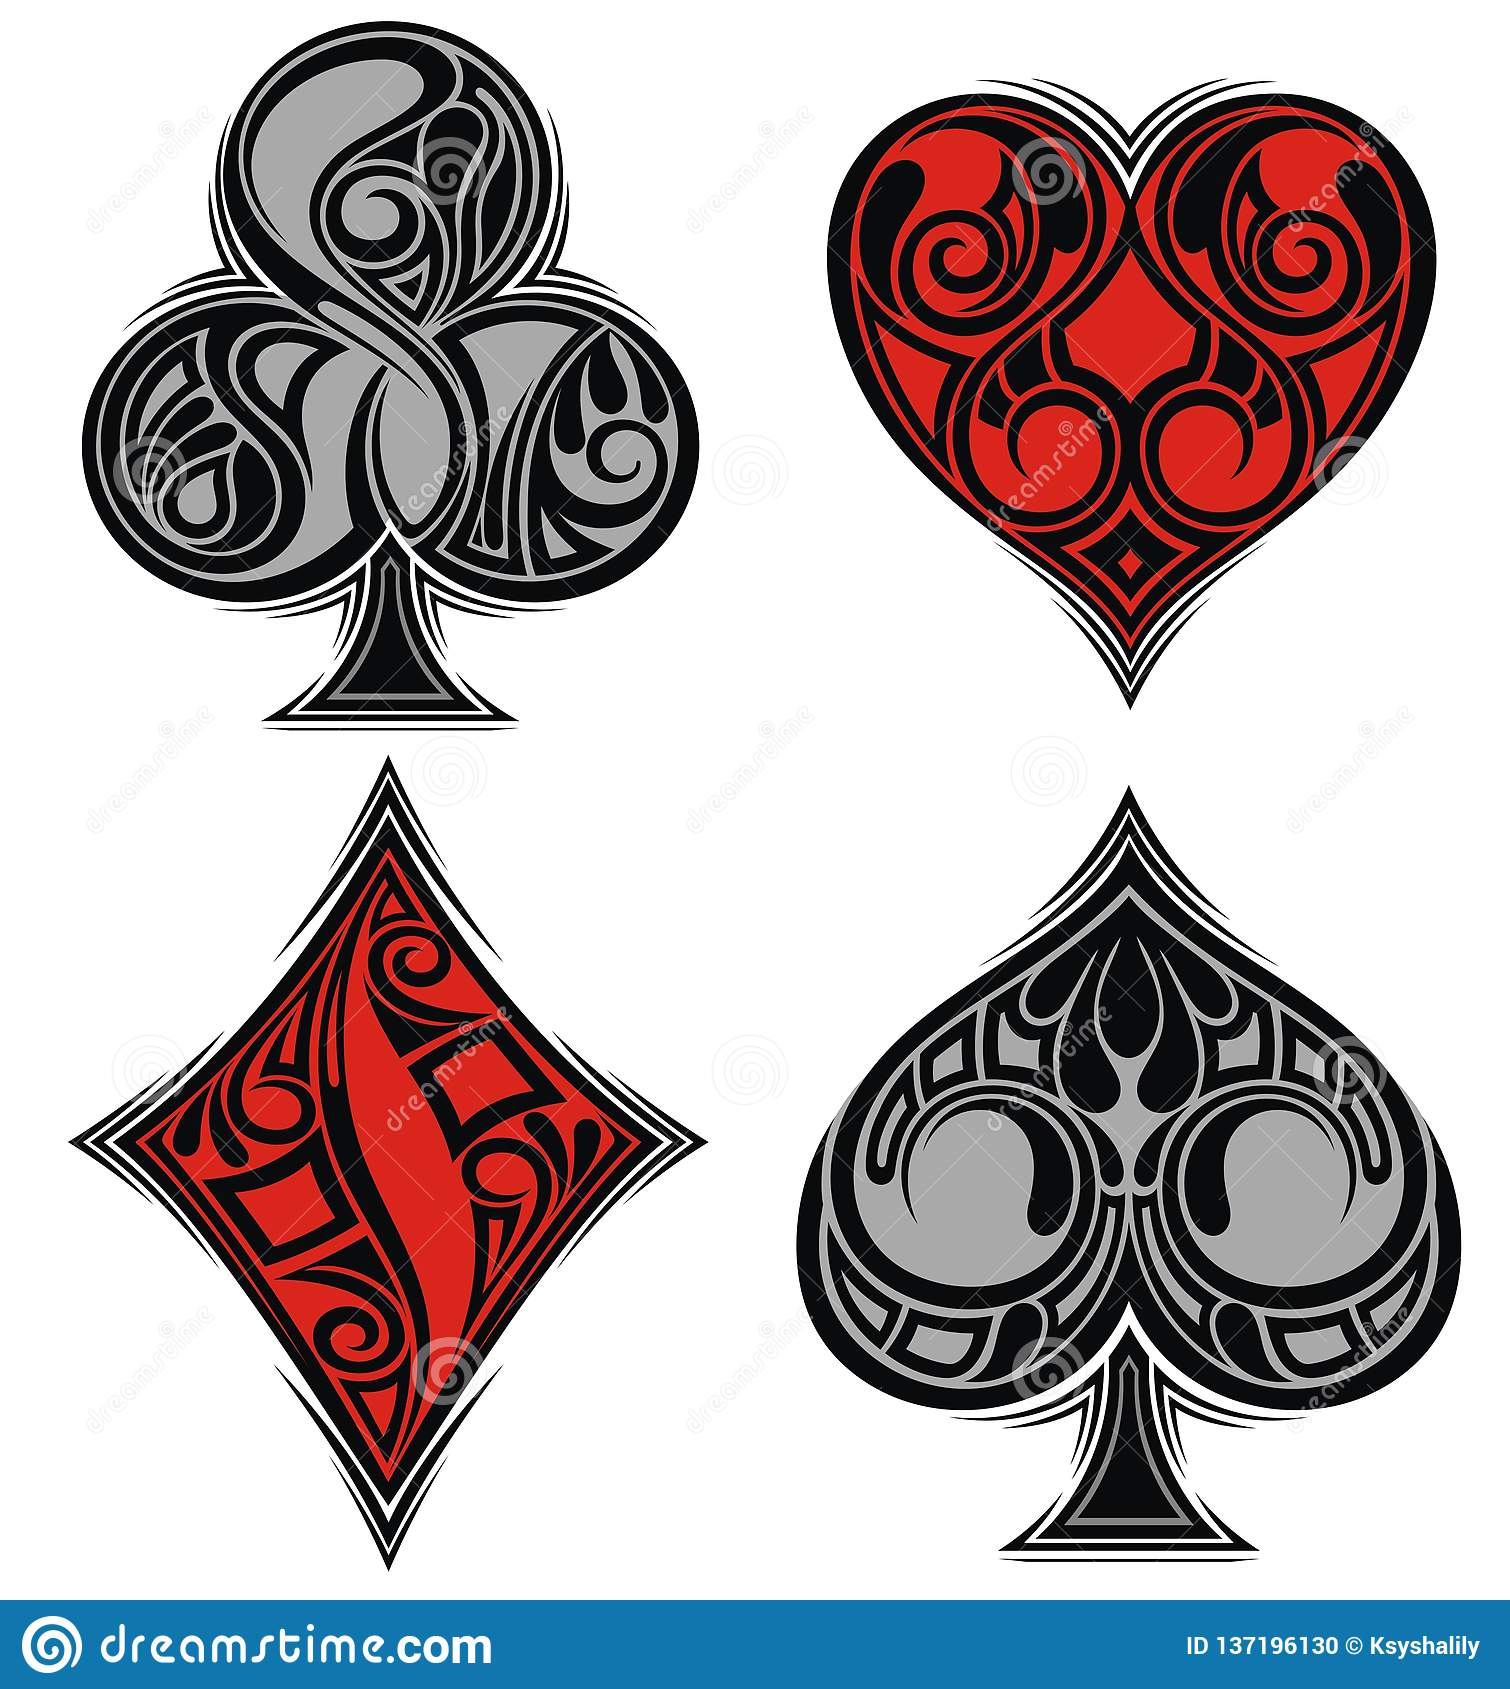 Queen poker card icon free